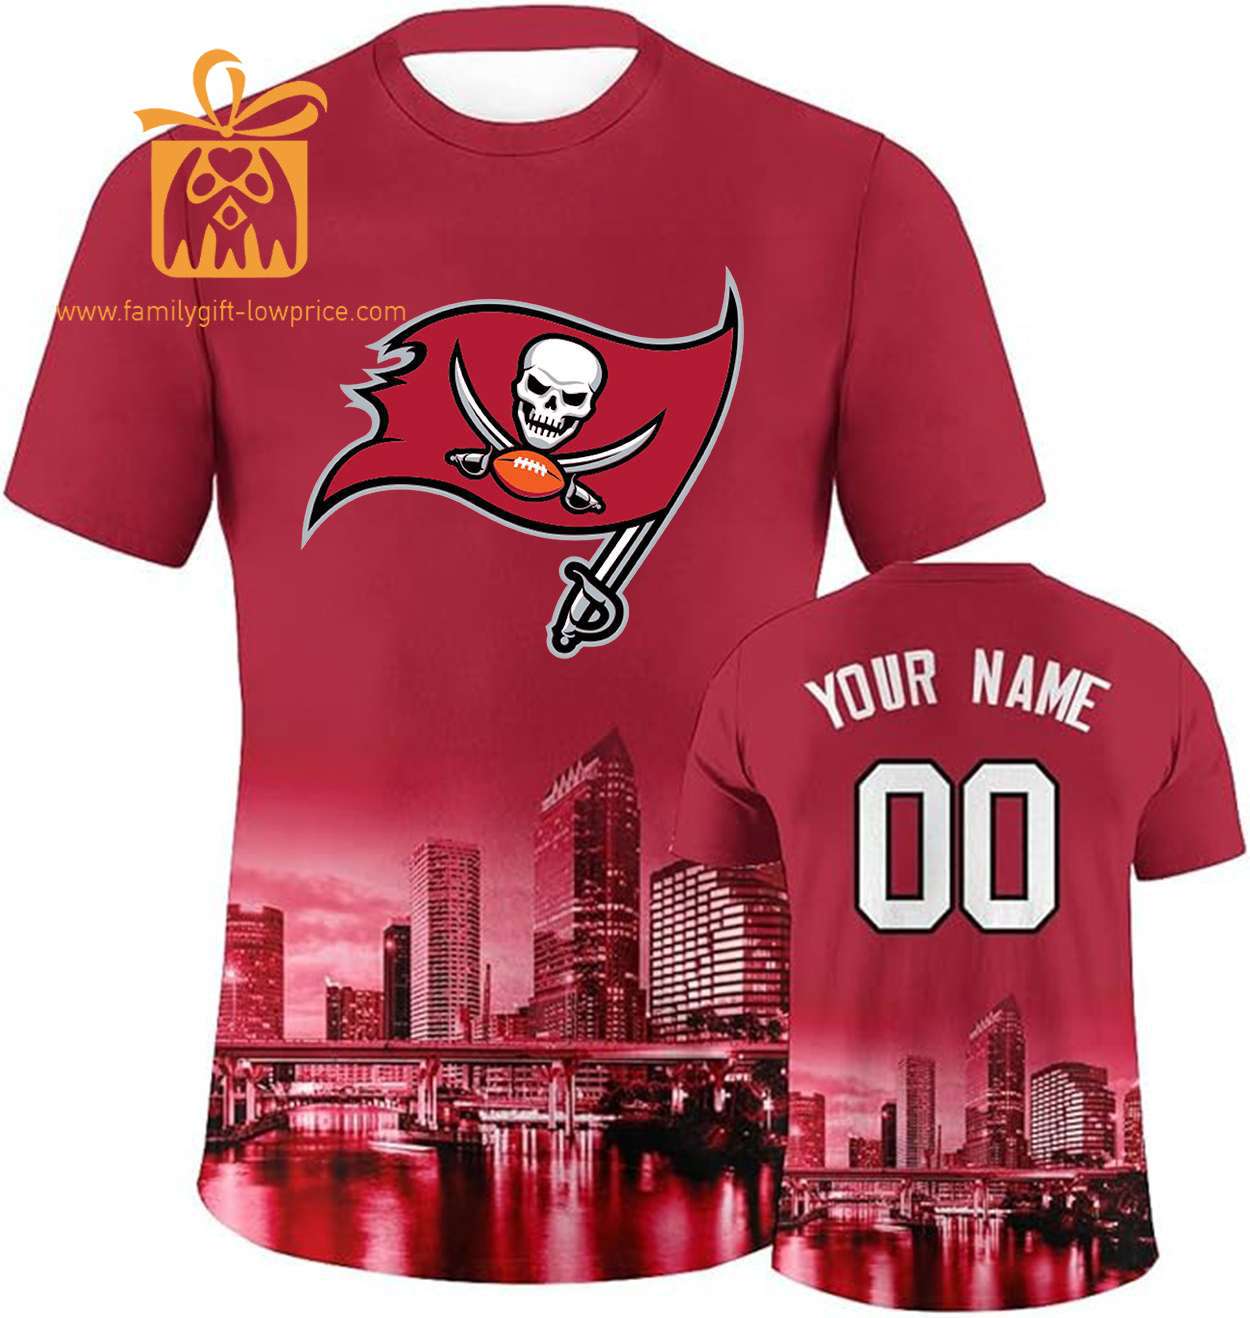 Tampa Bay Buccaneers Custom Football Shirts - Personalized Name & Number, Ideal for Fans